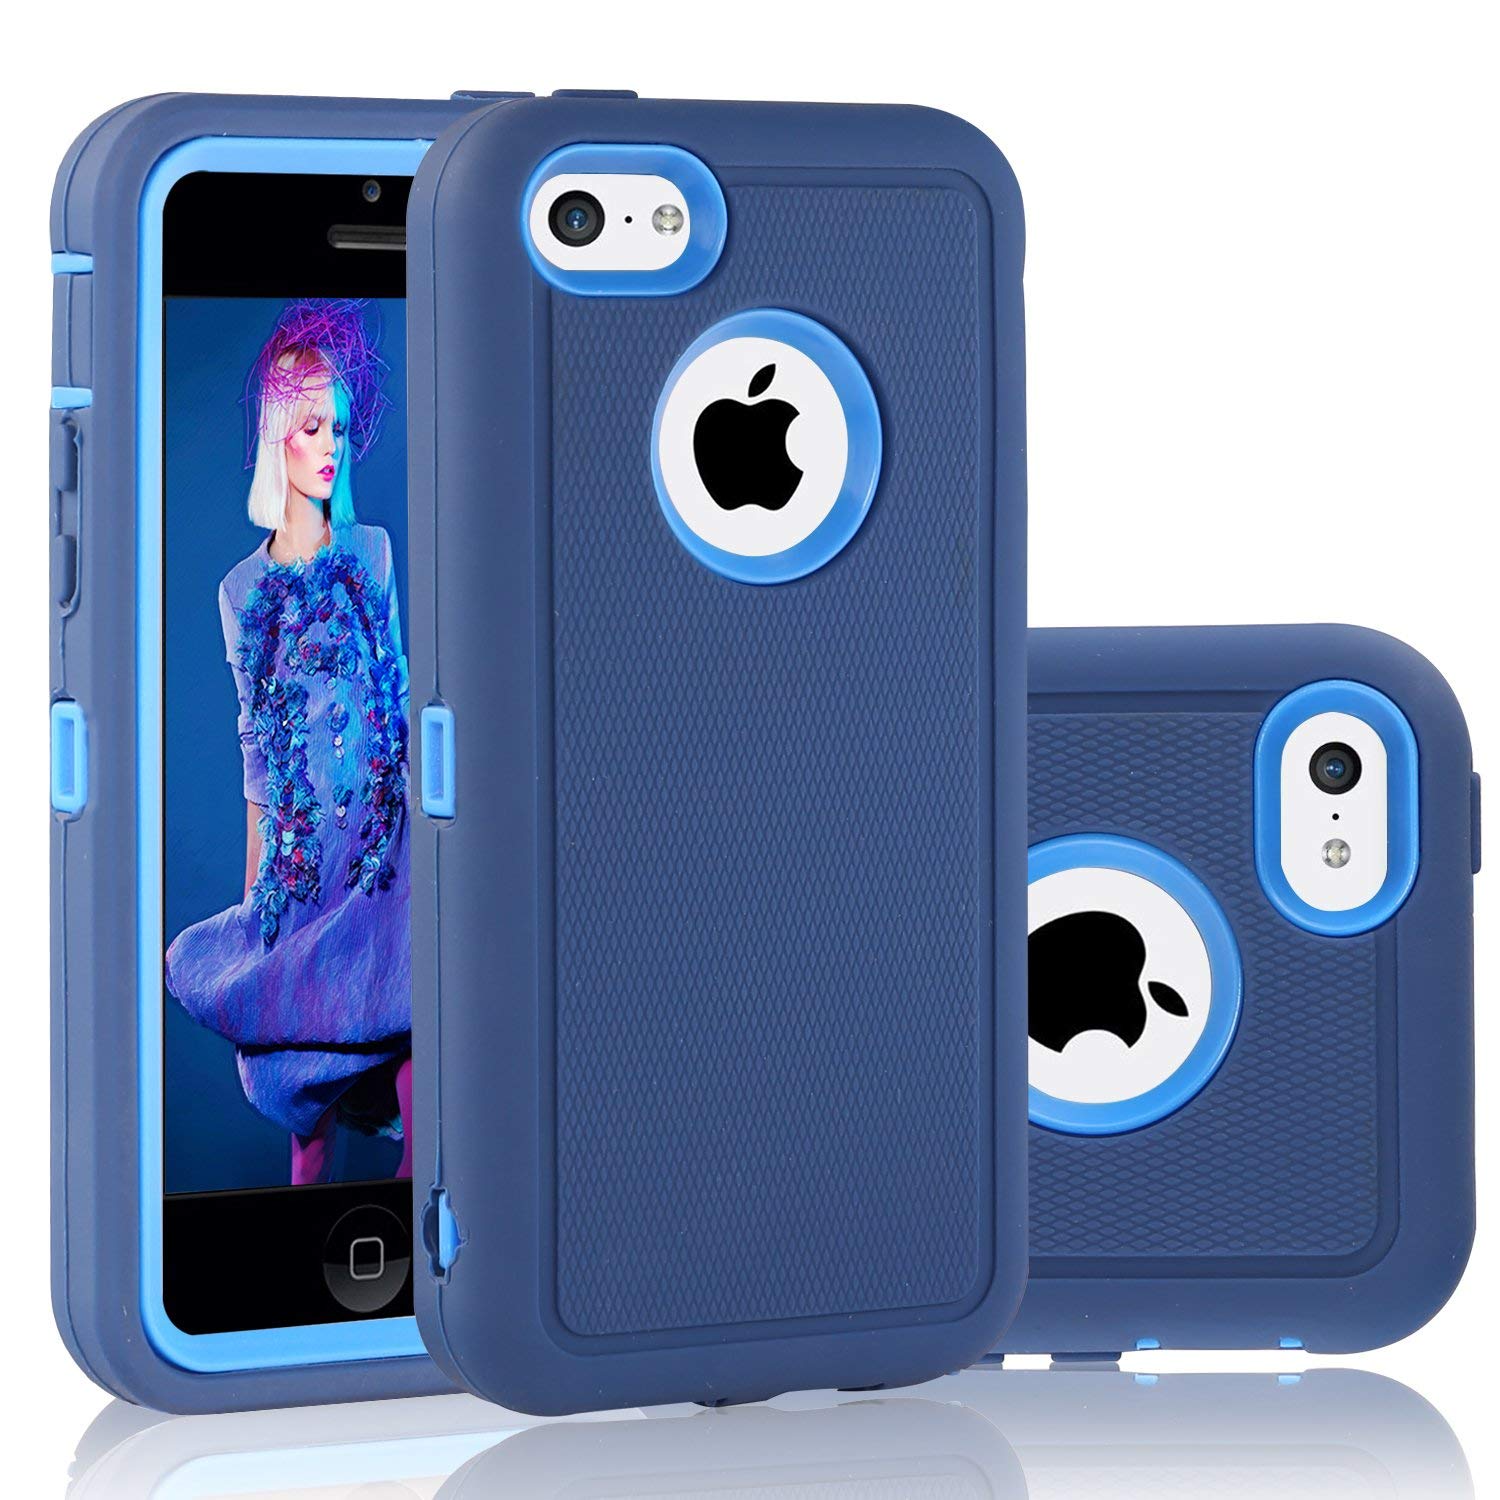 iPhone 5C Case, FOGEEK Dual Layer Anti Slip 360 Full Body Cover Case PC and TPU Shockproof Protective Compatible for Apple iPhone 5C ONLY(Dark Blue) 